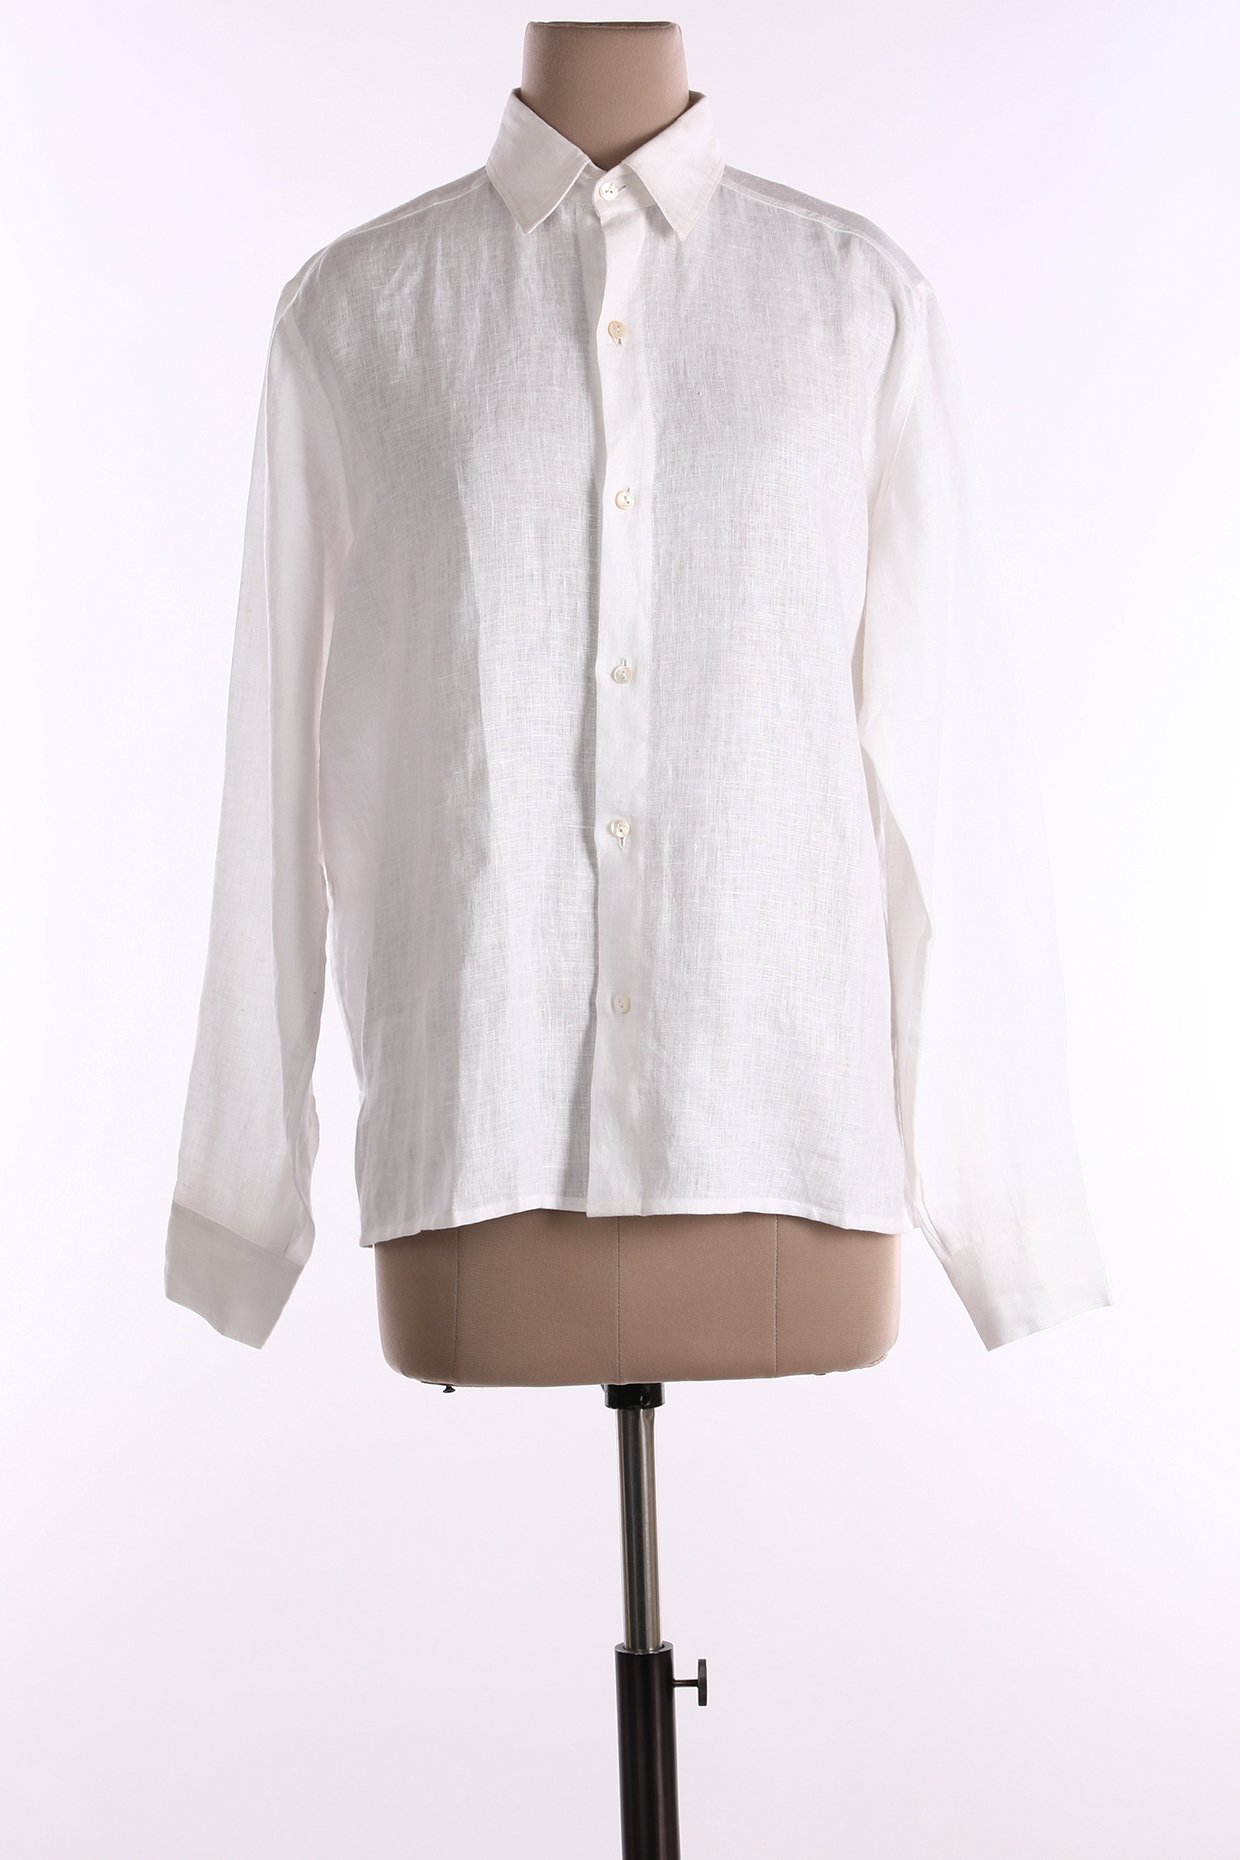 White Cotton and Linen Oxford Western Shirt Shirt